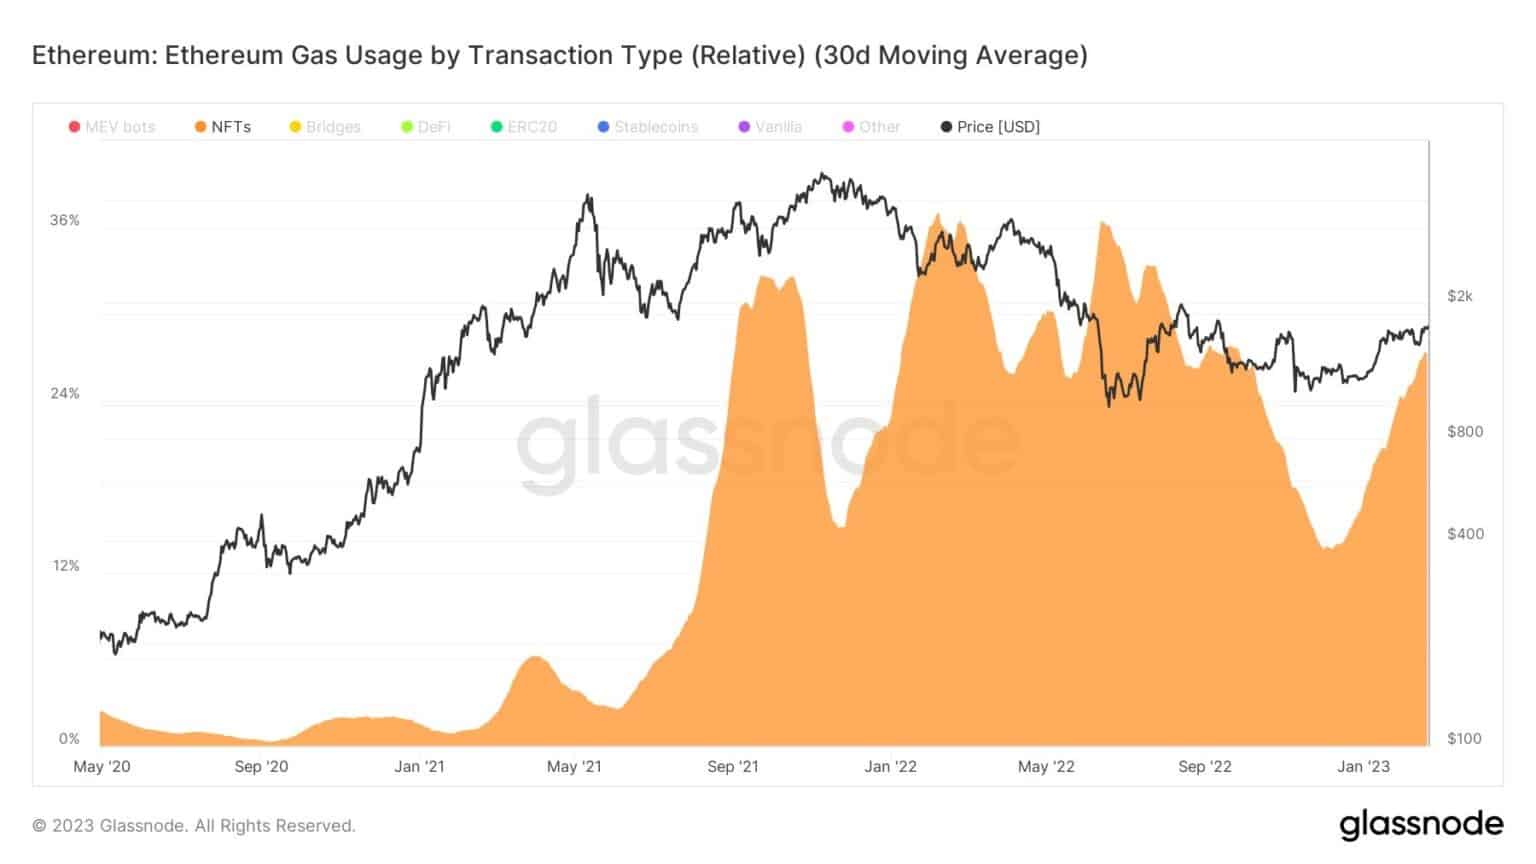 Ethereum gas usage by transaction type (Source: Glassnode)